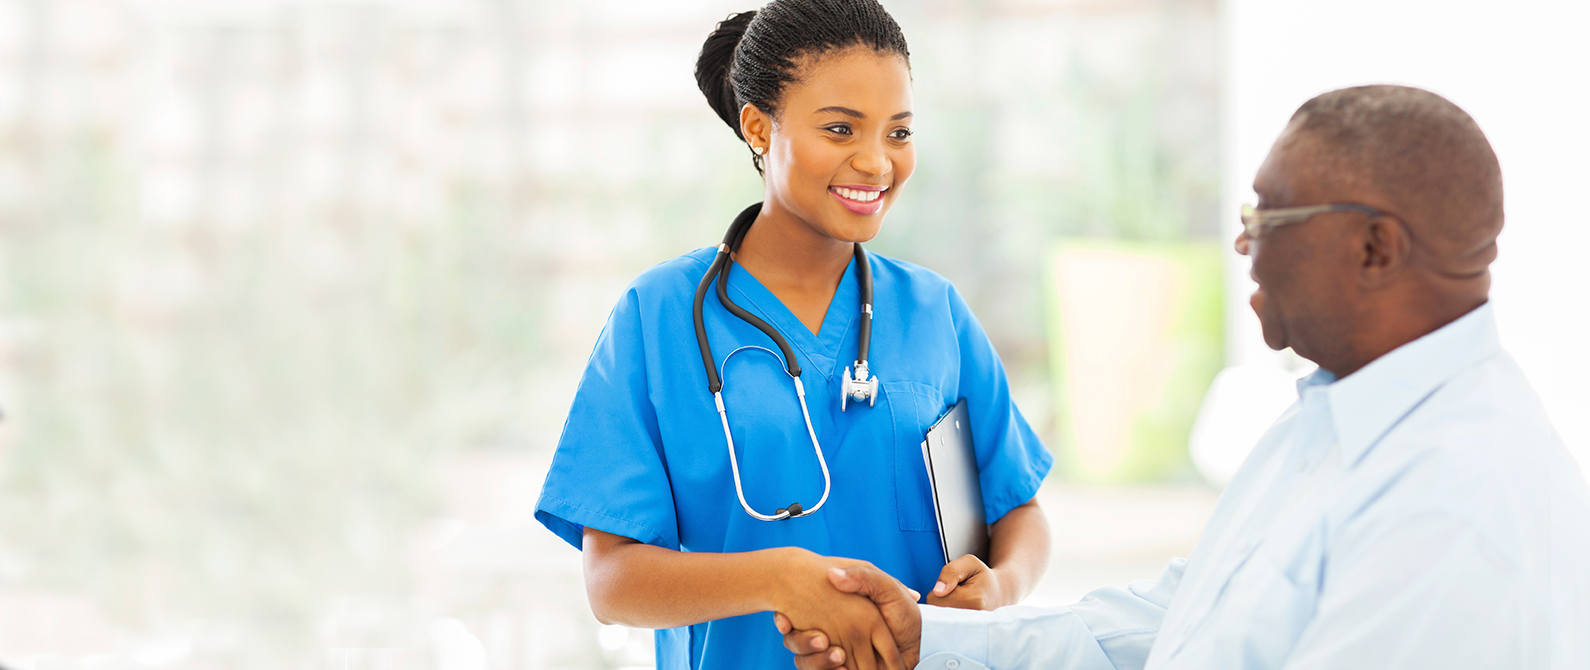 image of nurse shaking hand with patient